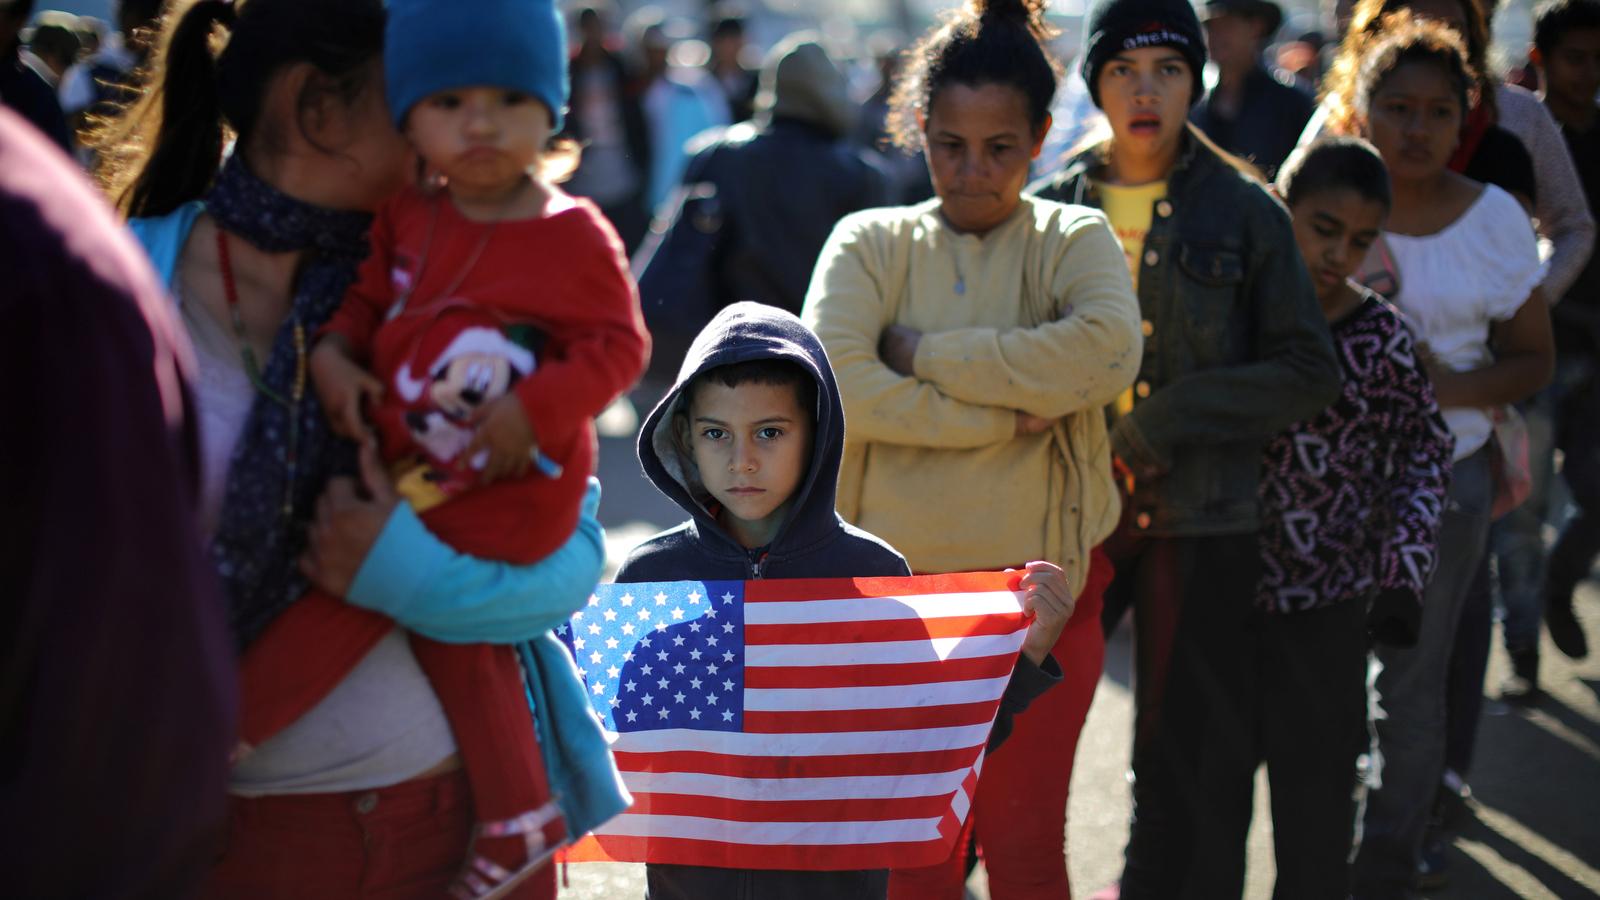 Mother with her son, holding a US flag, waits in line for food.